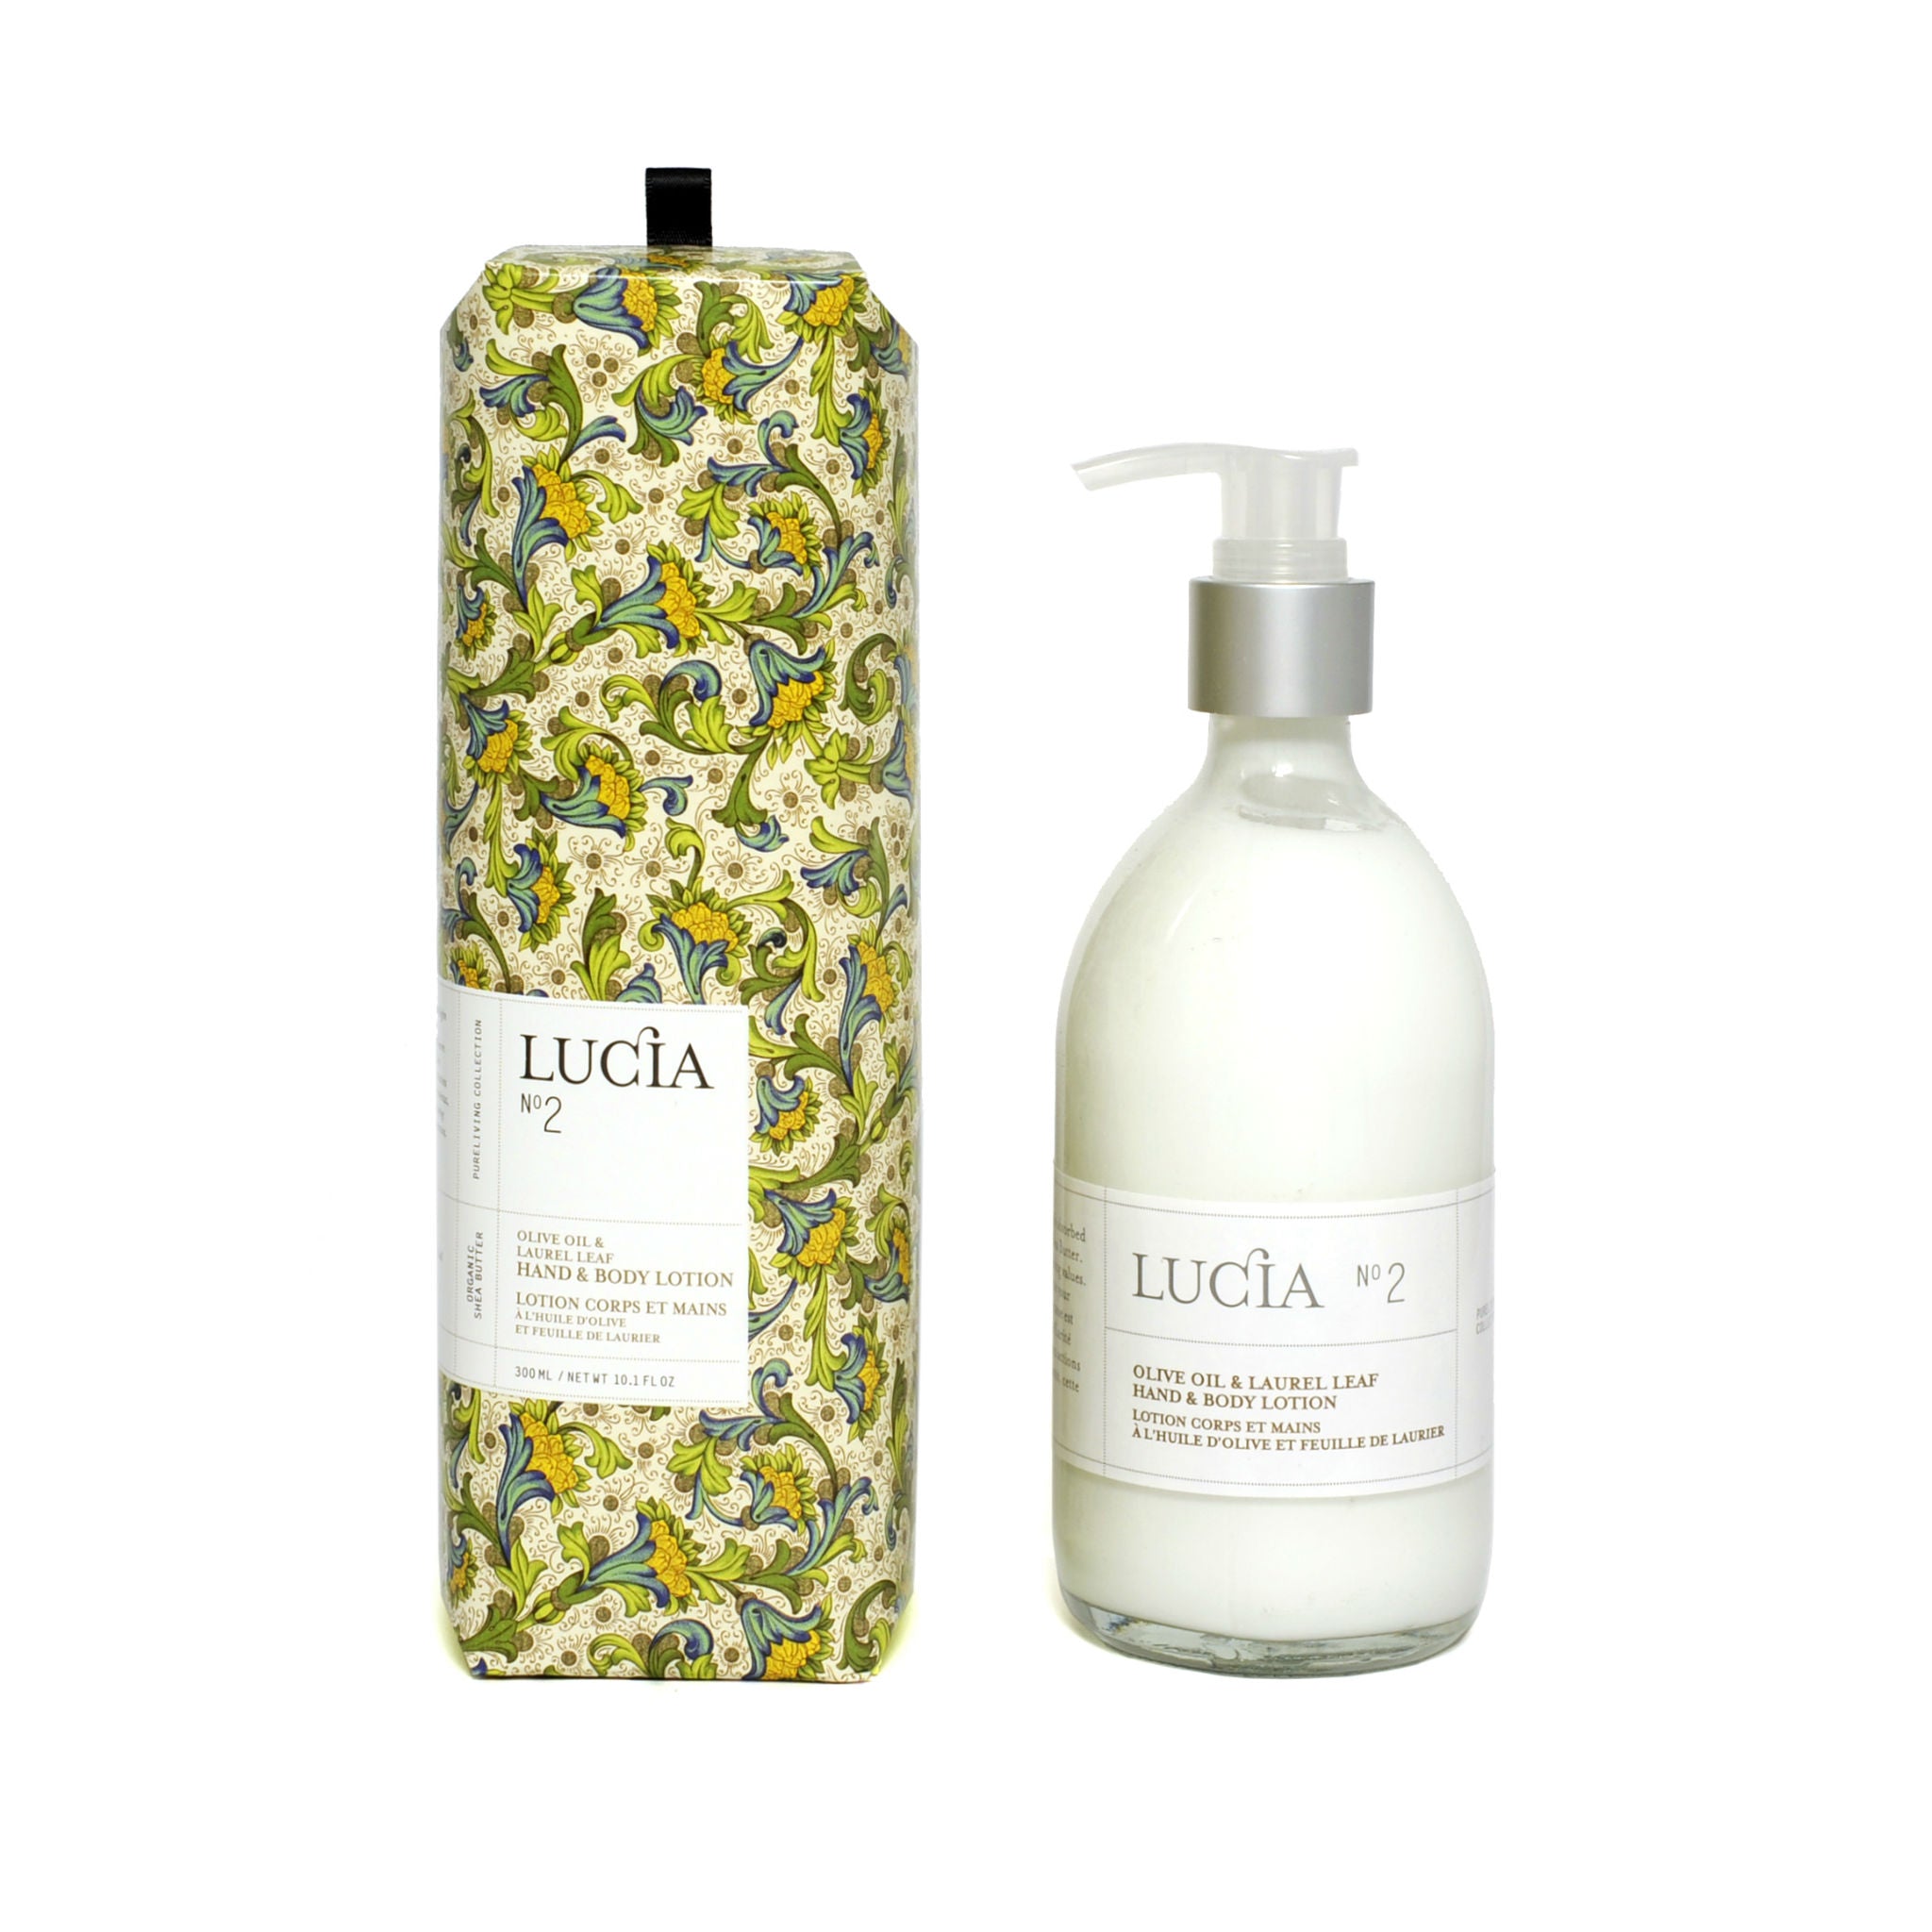 Olive Oil & Laurel Leaf, Hand & Body Lotion, LUCIA-VONMEL Luxe Gifts